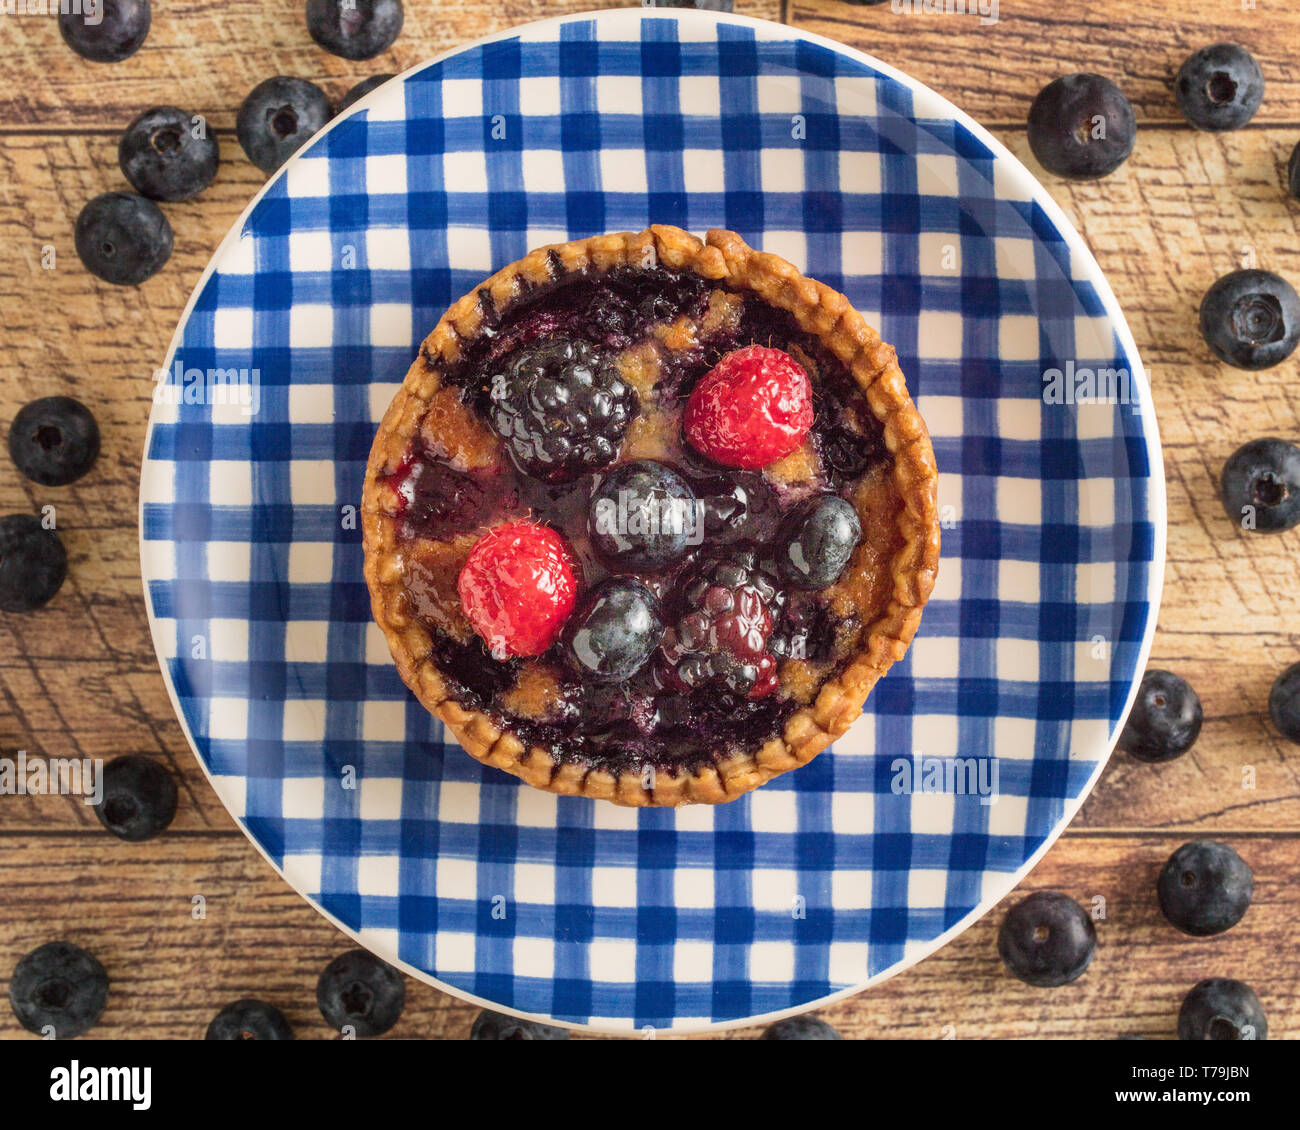 Mixed Berry Tart on a Blue Gingham Plate with a Wood Table Background Stock Photo